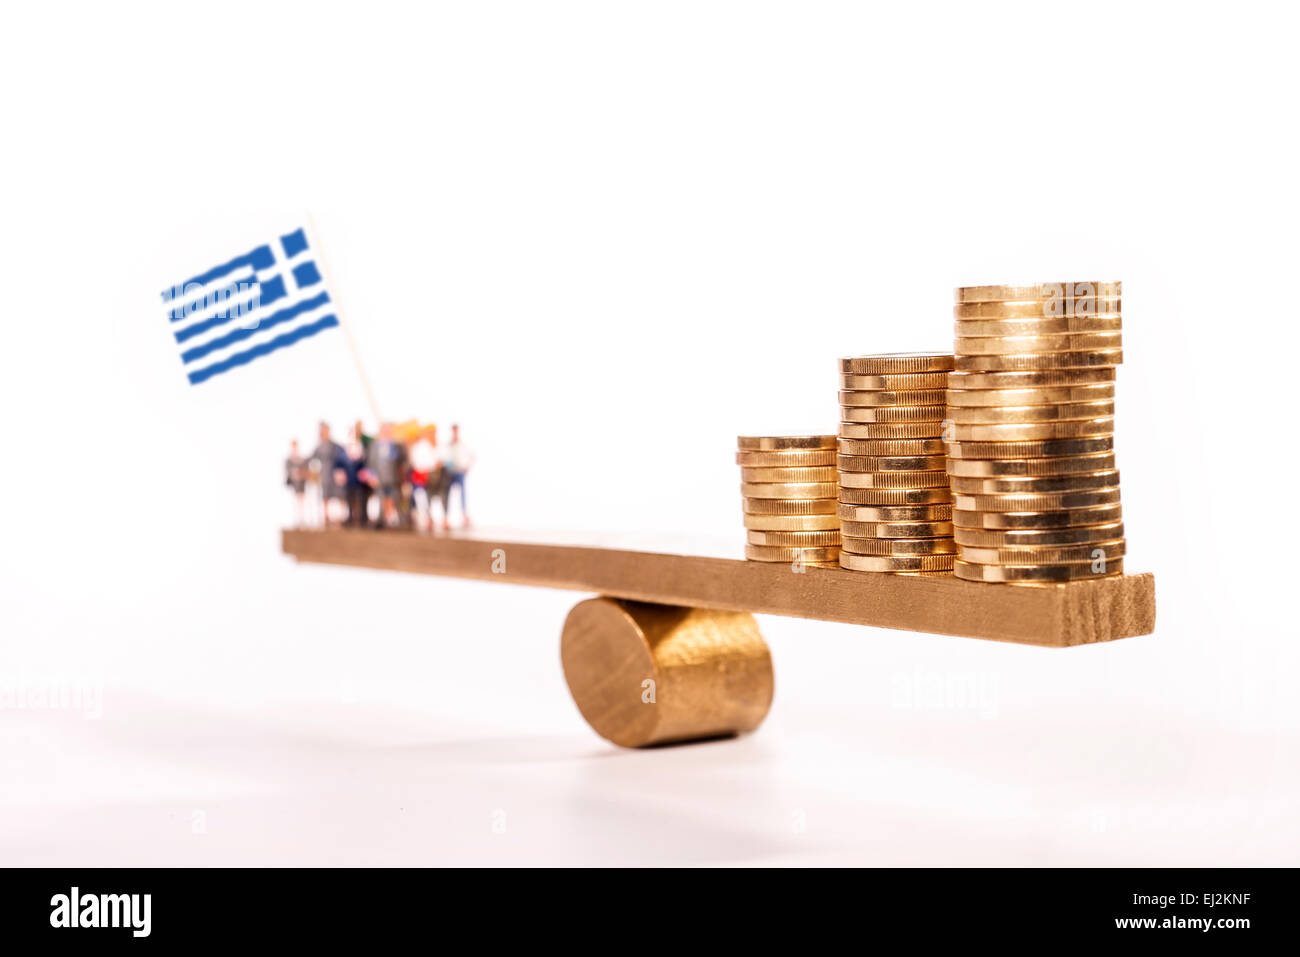 Seesaw with coins on one side and a group of people with the Greek flag on the other side. Stock Photo